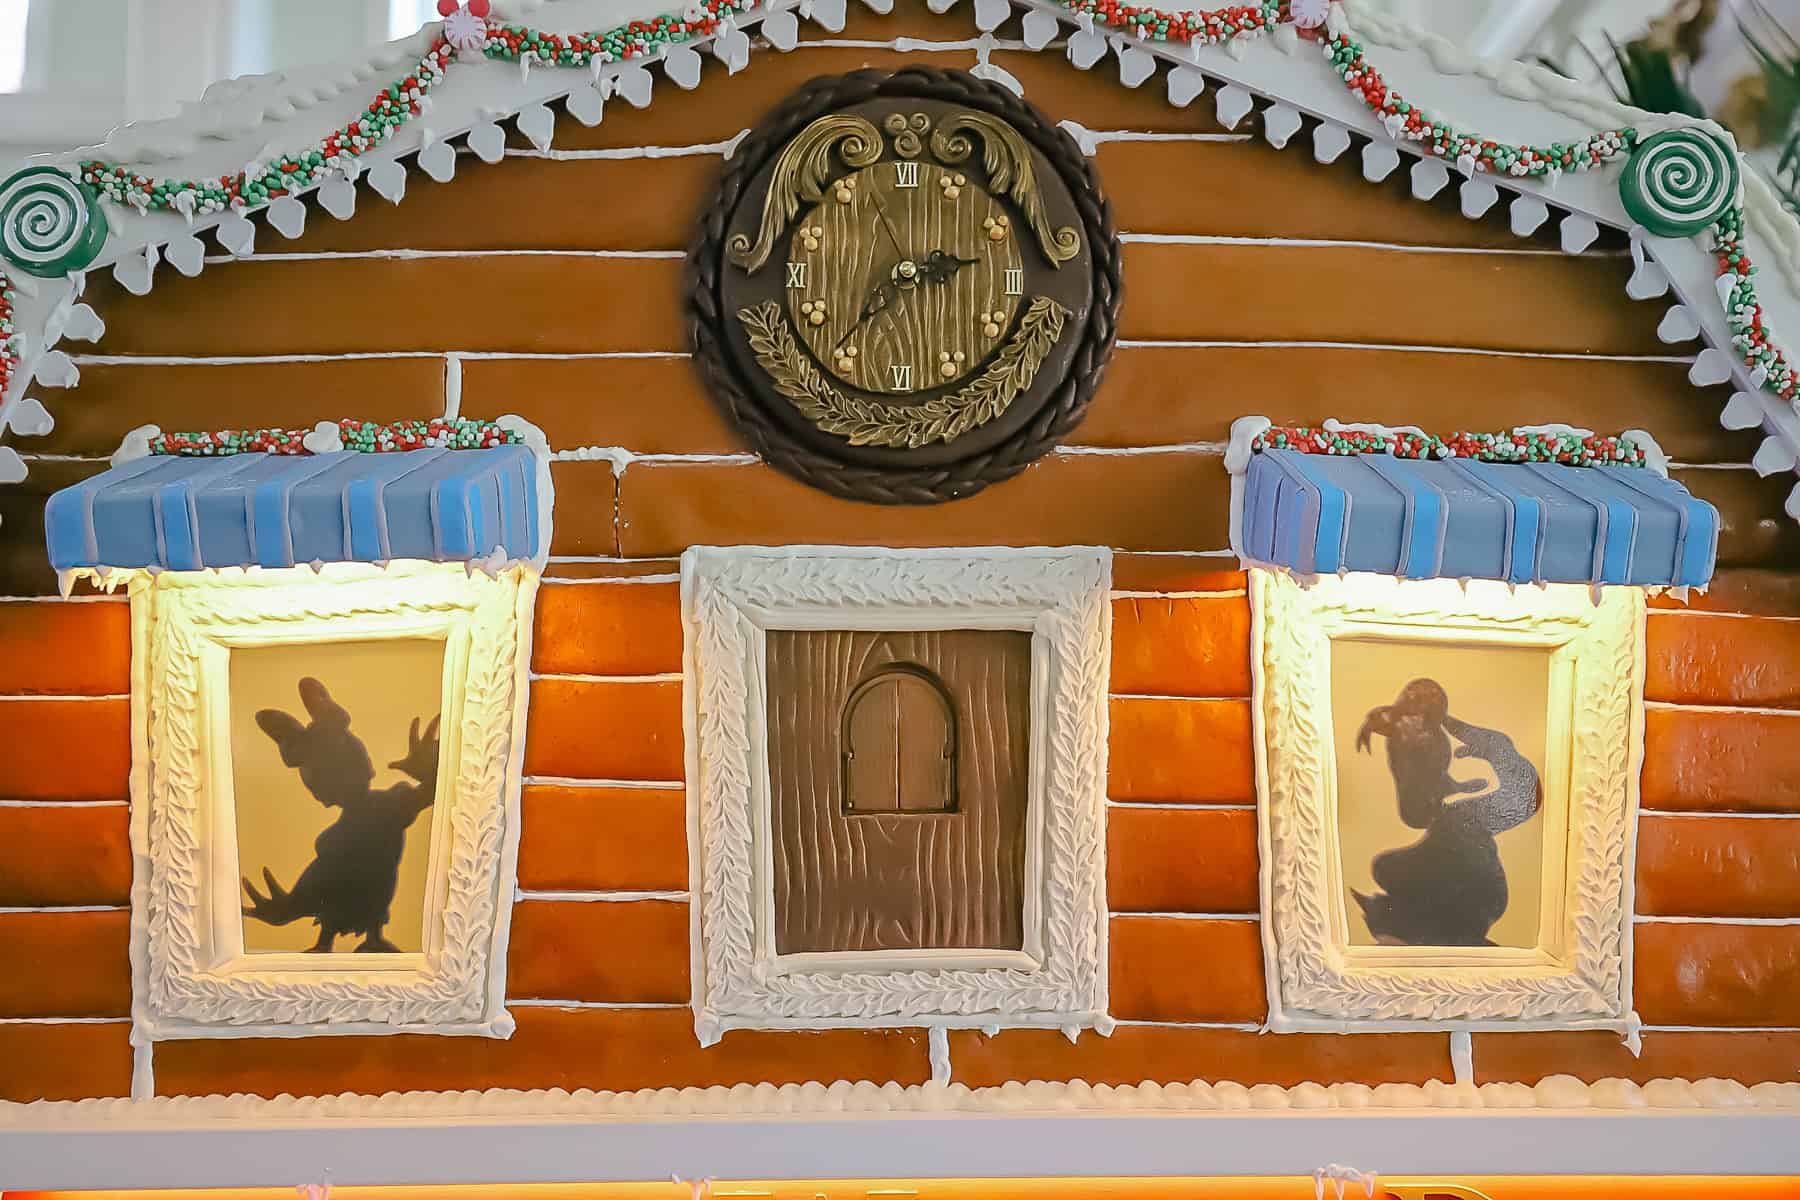 Silhouettes of Donald and Daisy Duck in the top floor of Disney's Boardwalk gingerbread house